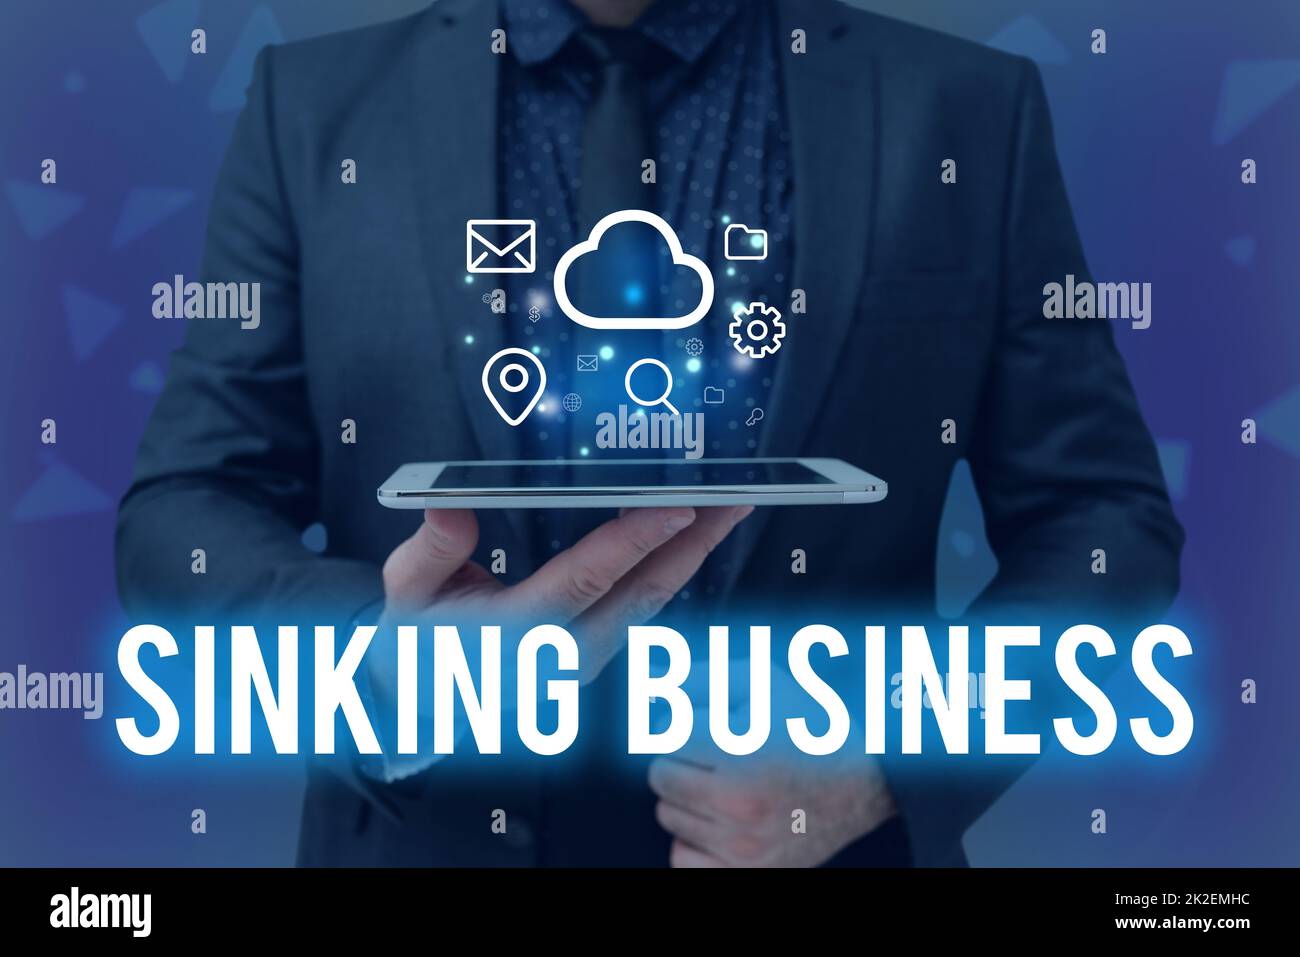 Writing displaying text Sinking Business. Business approach the company or other organization that is failing Man holding Screen Of Mobile Phone Showing The Futuristic Technology. Stock Photo